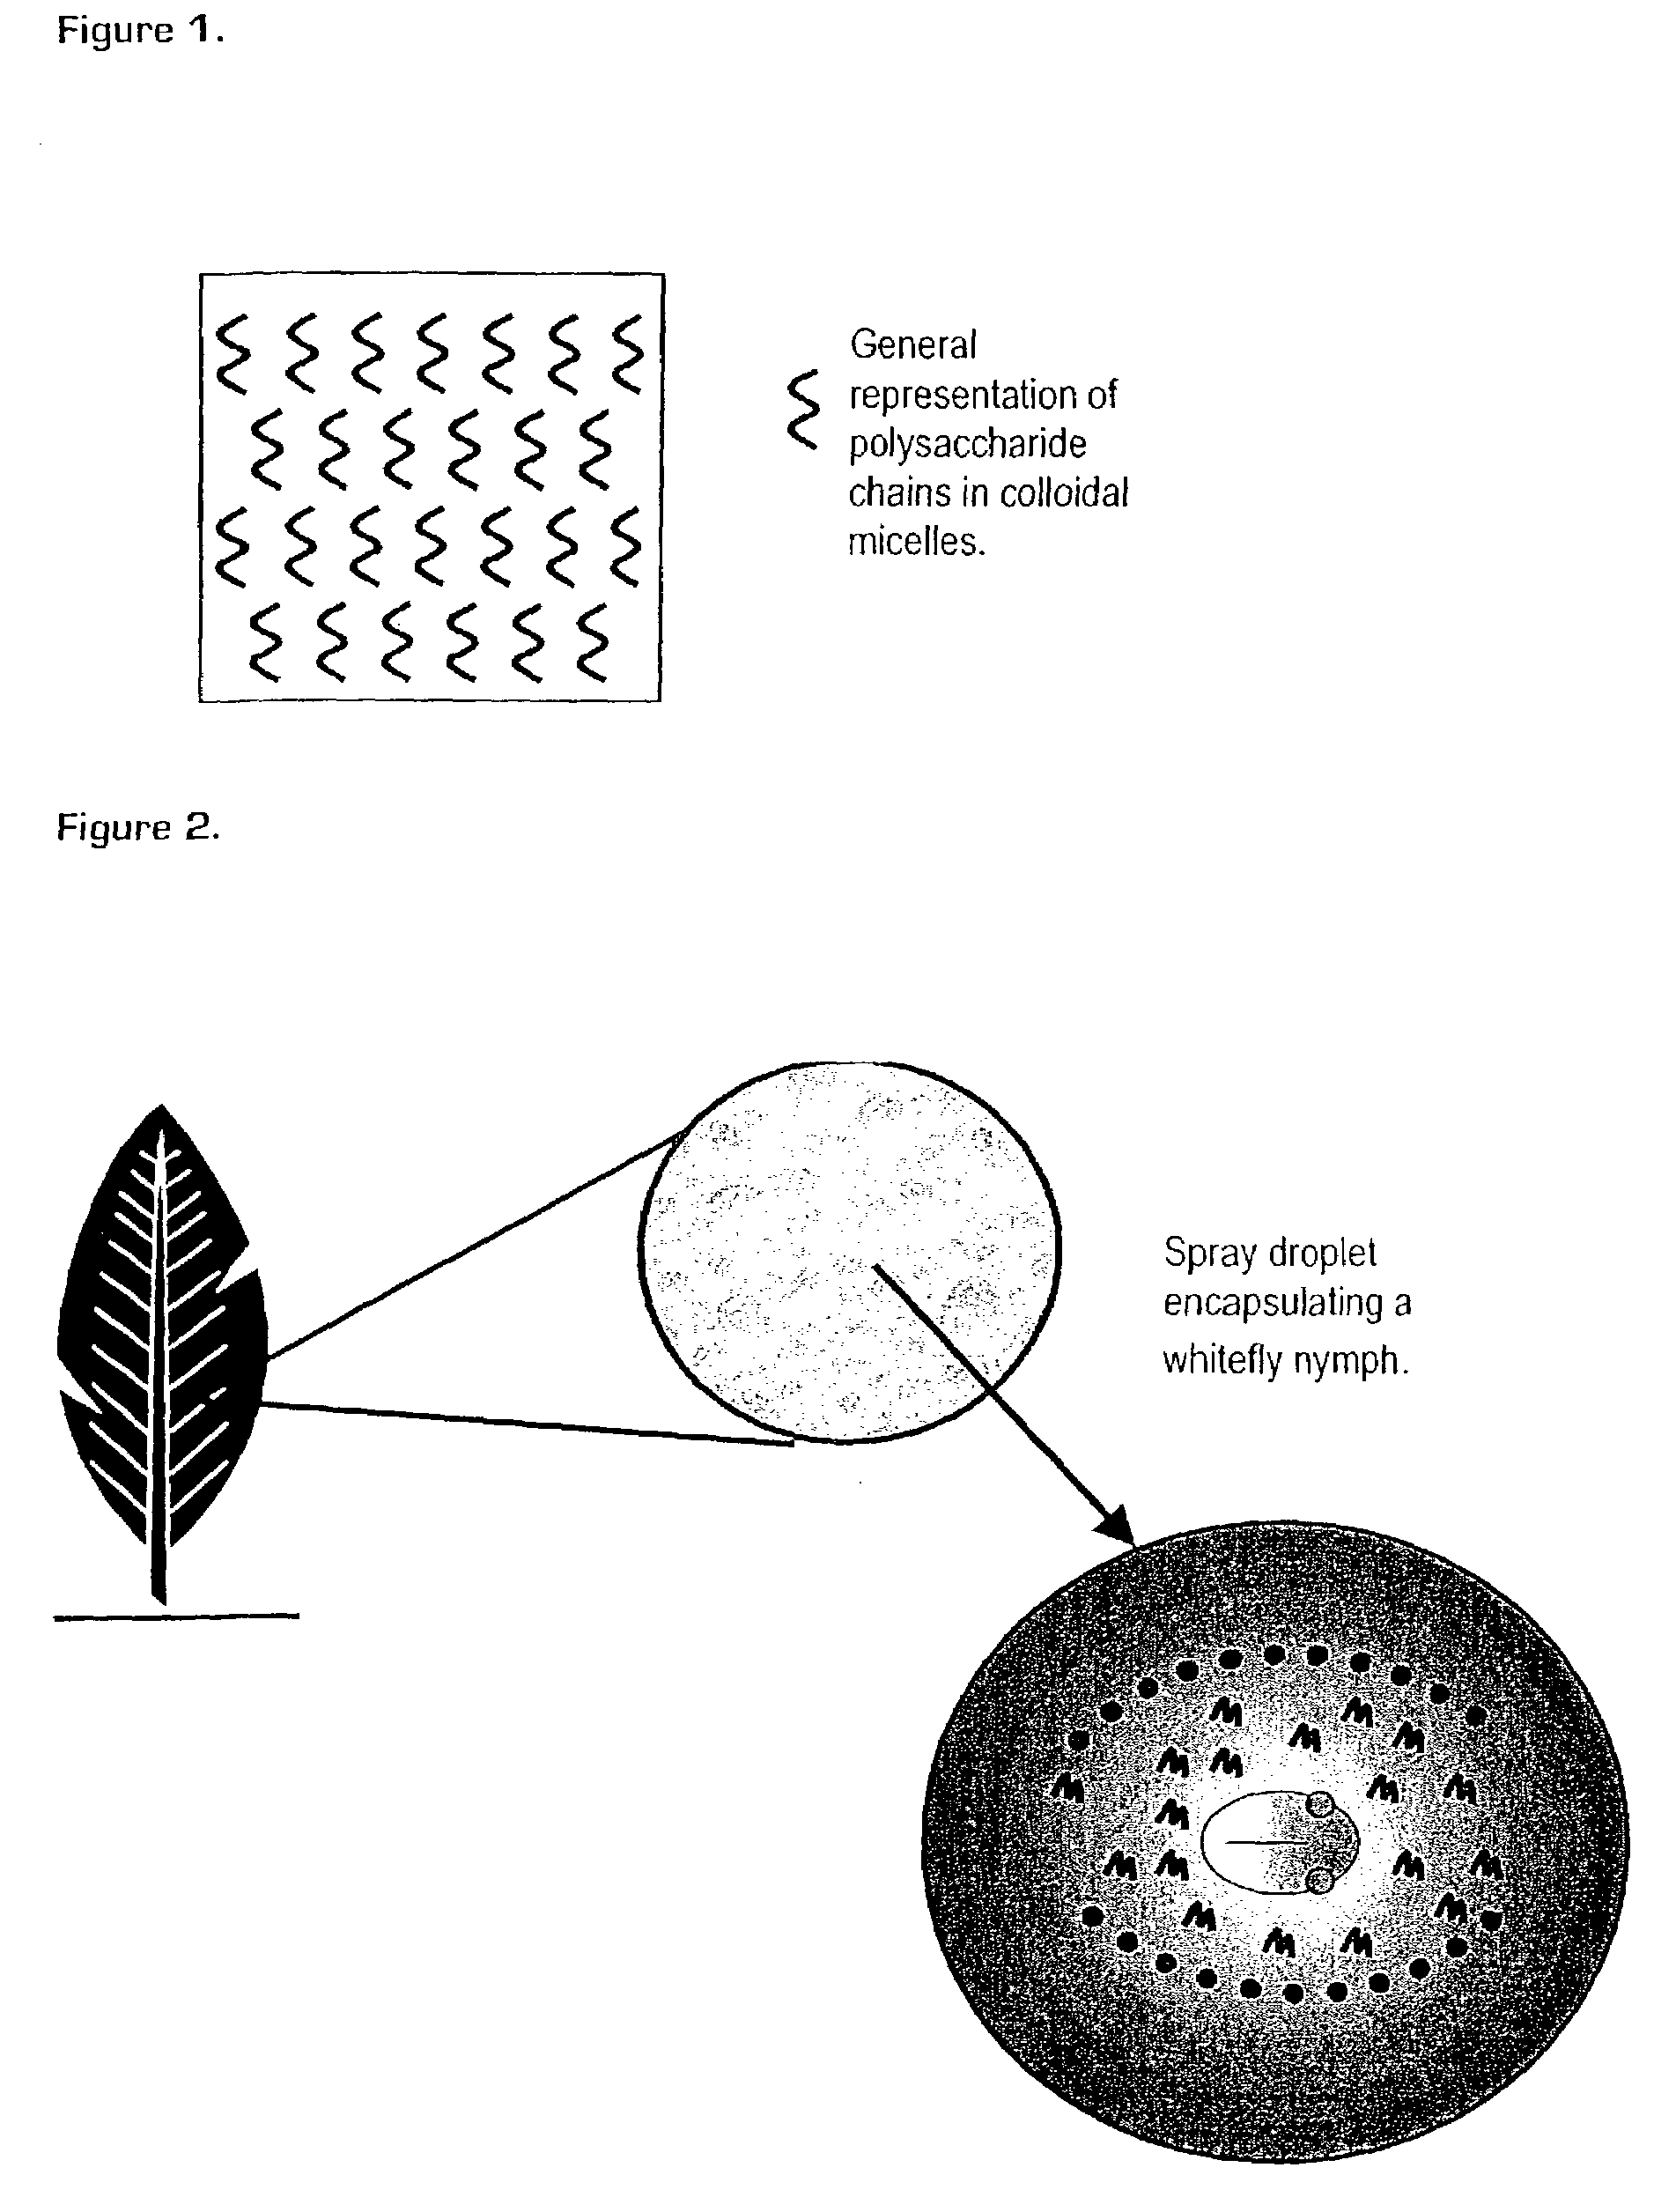 Physical mode of action pesticide